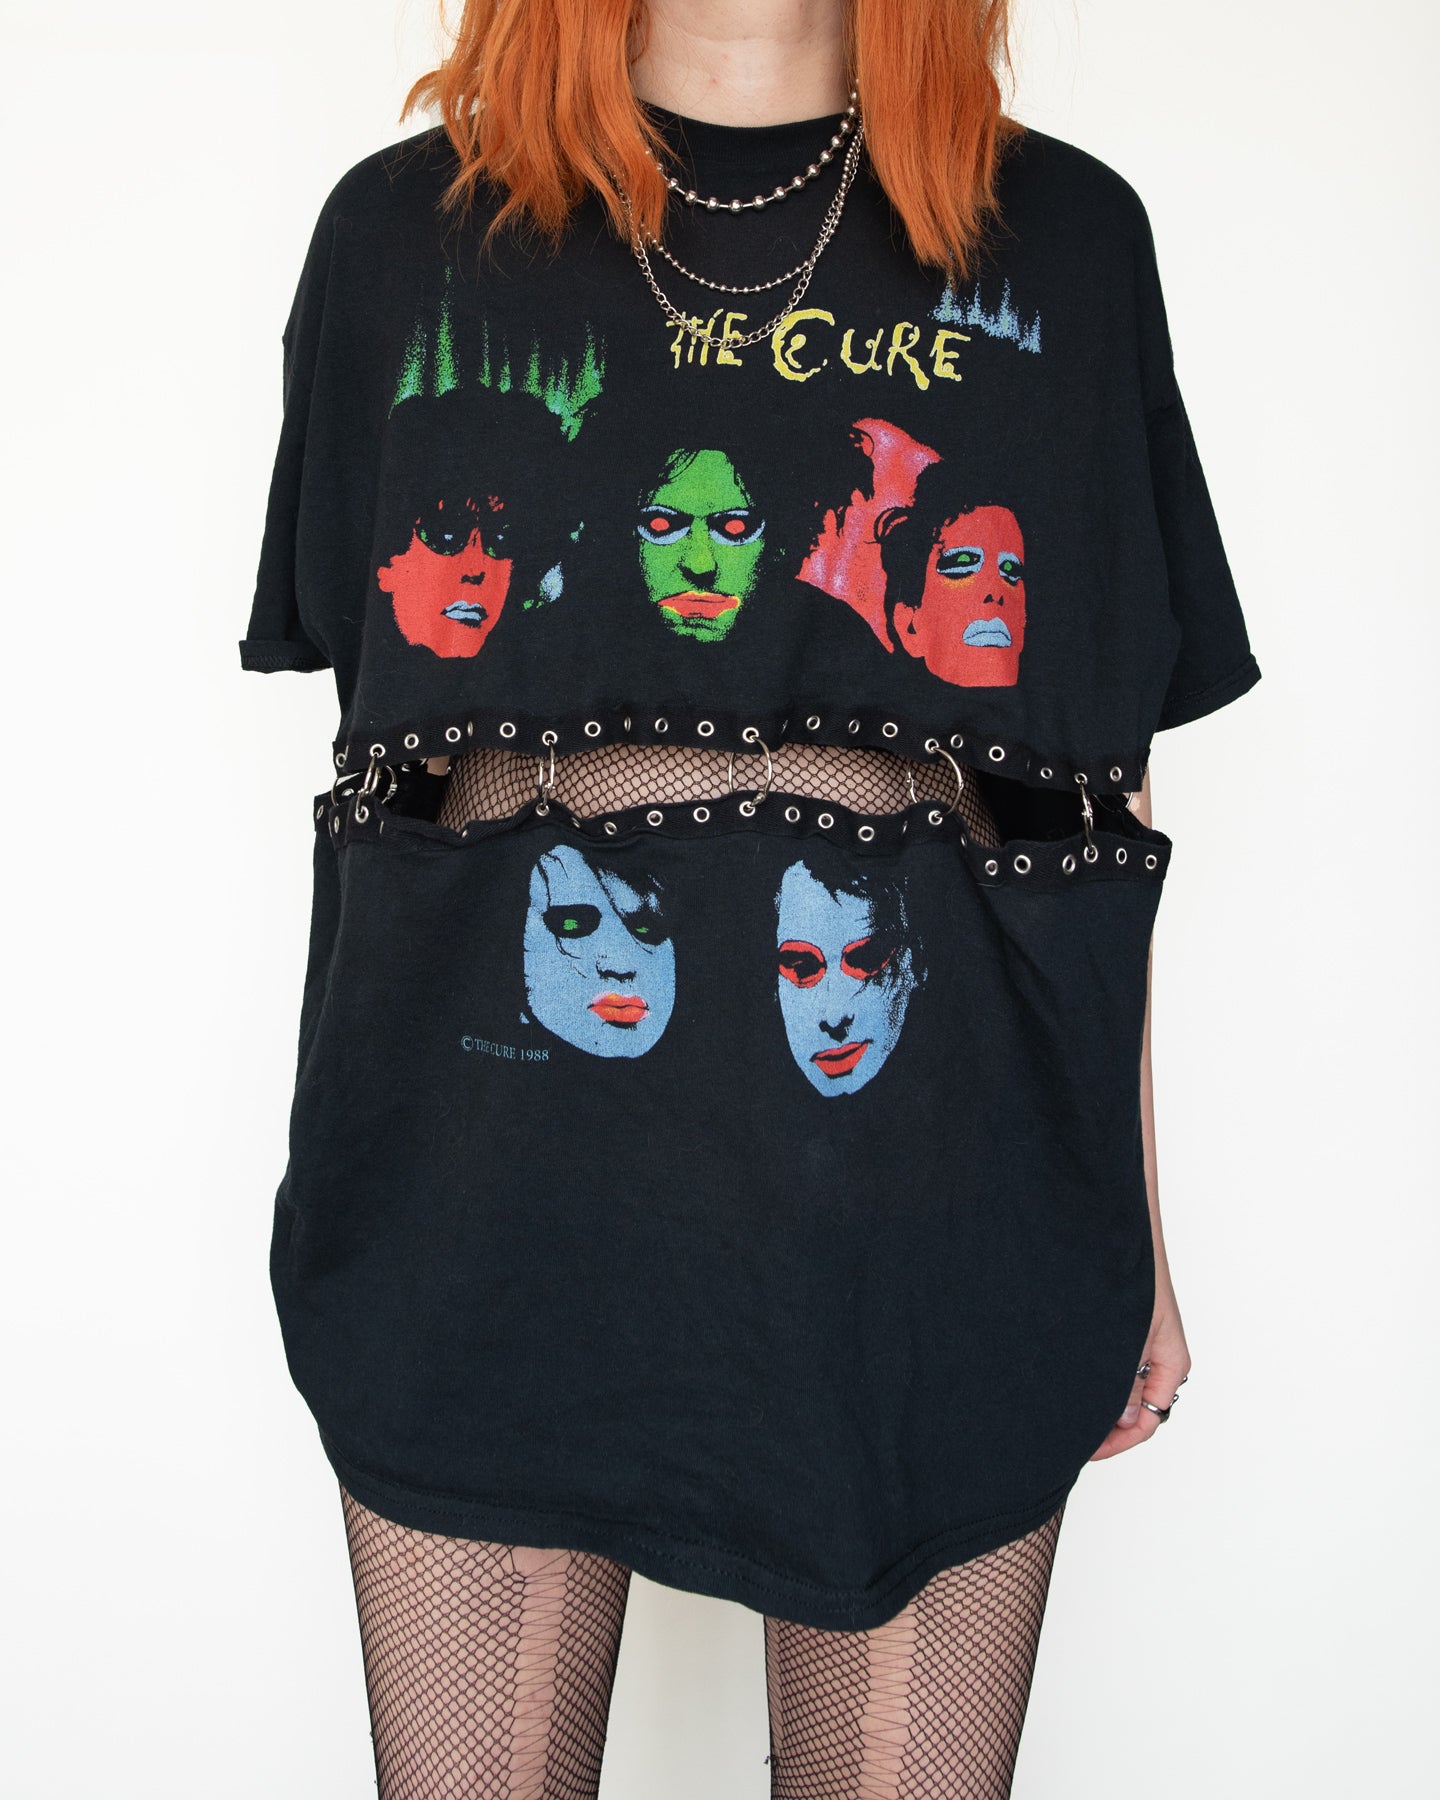 The Cure Tee